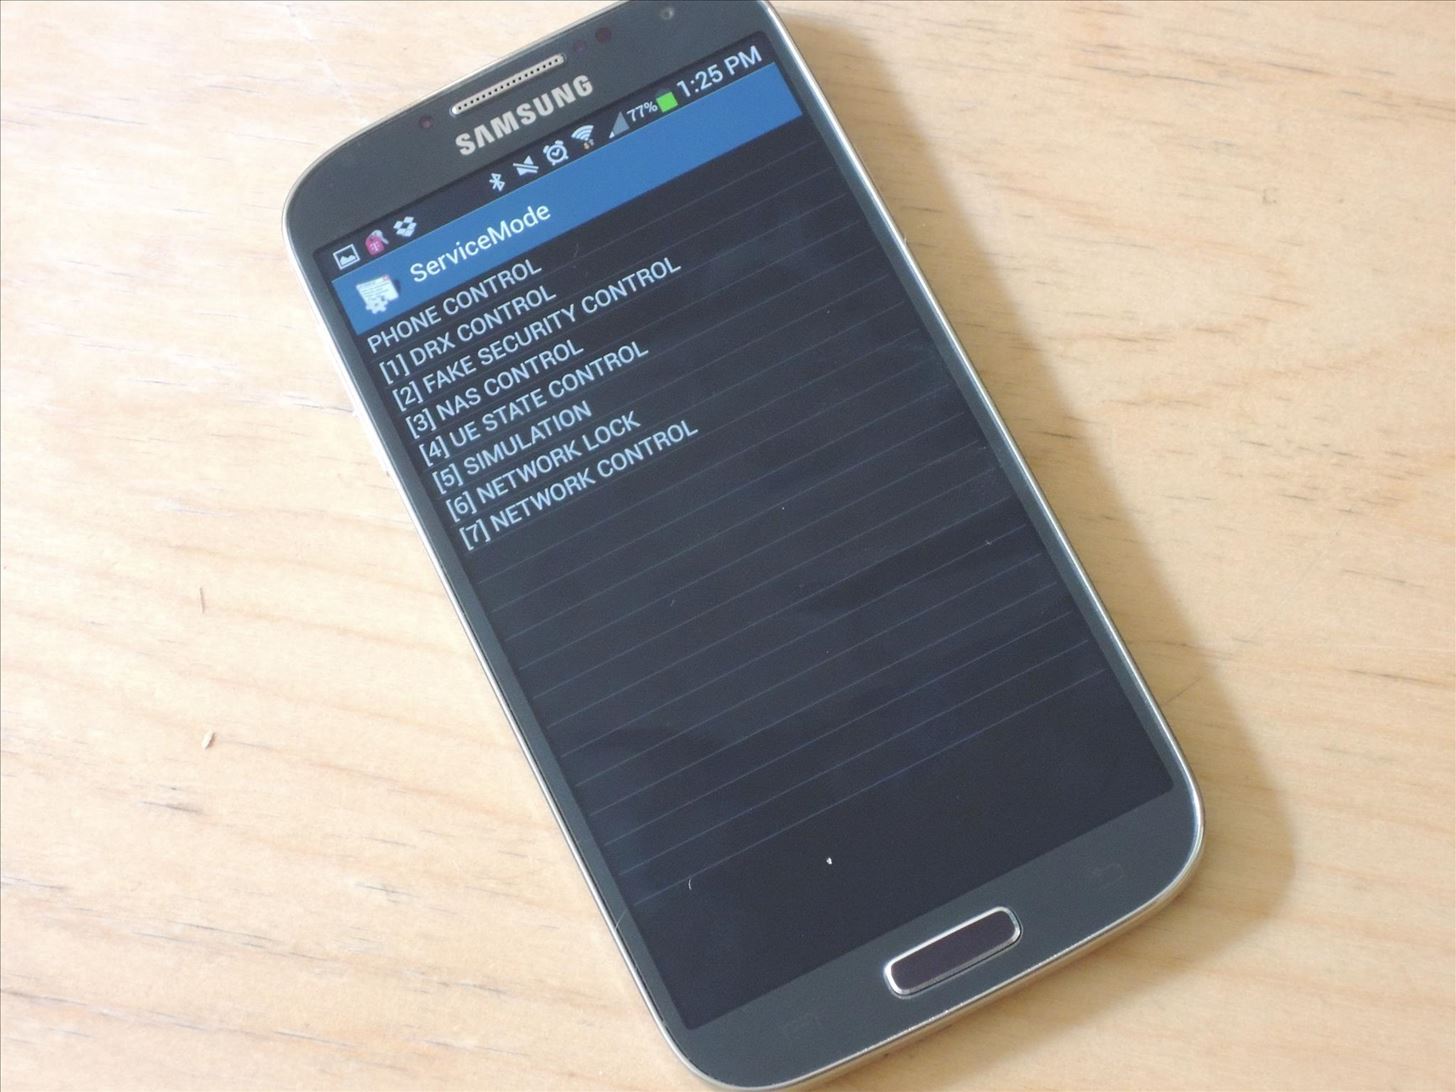 How to Carrier Unlock Your Samsung Galaxy S4 So You Can Use Another SIM Card